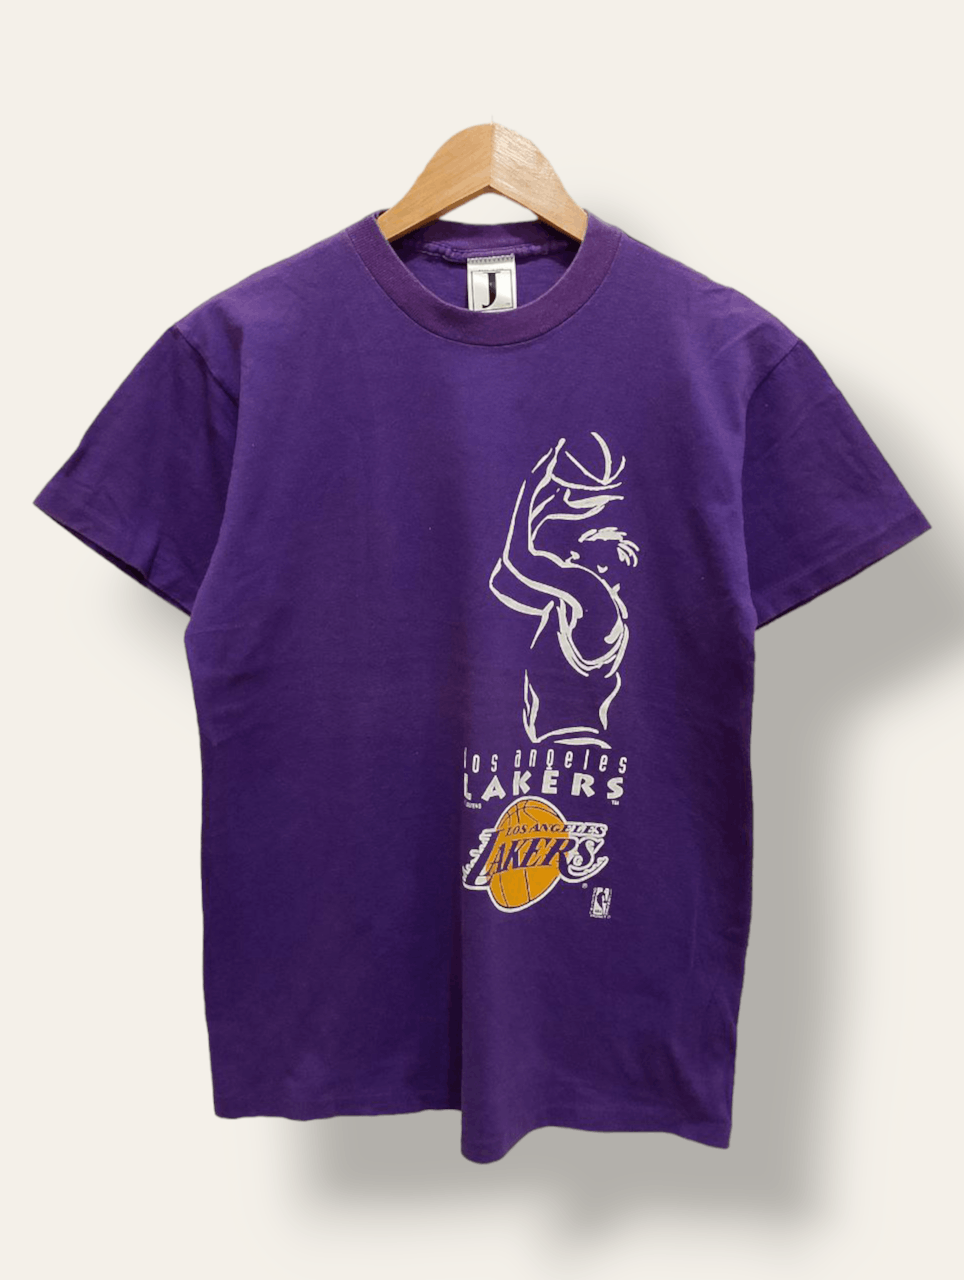 Vintage 90s Los Angeles Lakers by Jostens Made in USA Tees - 1